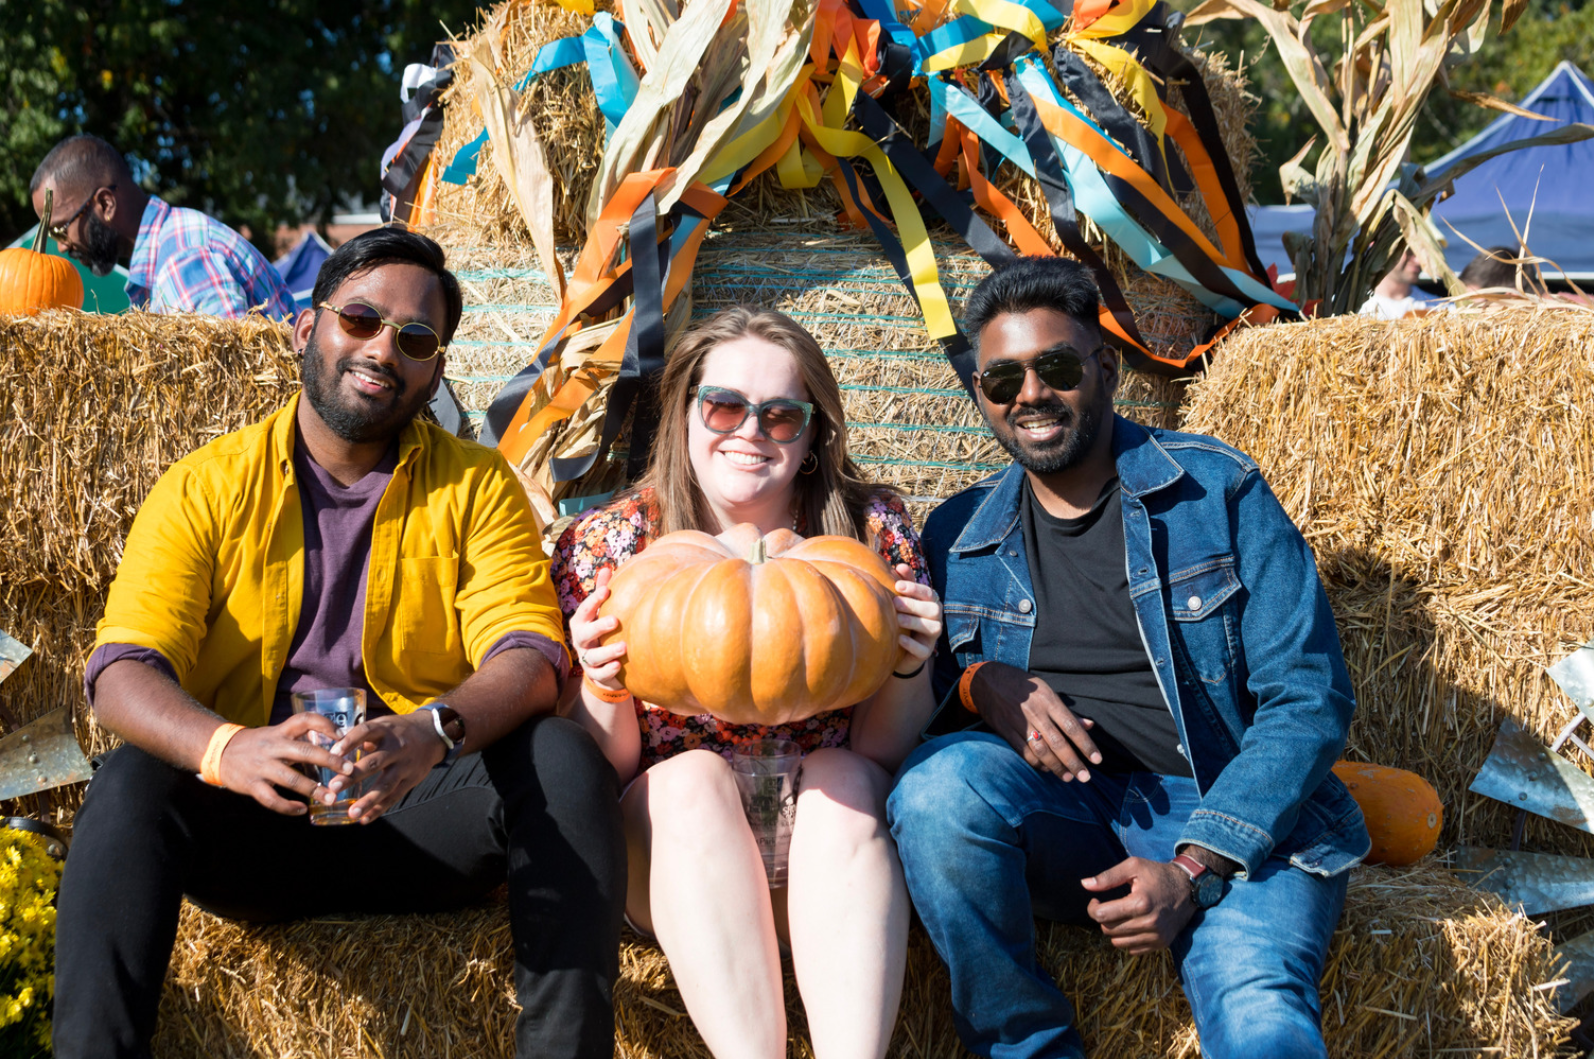 Three people with a large pumpkin pose at Falling for Local 2022